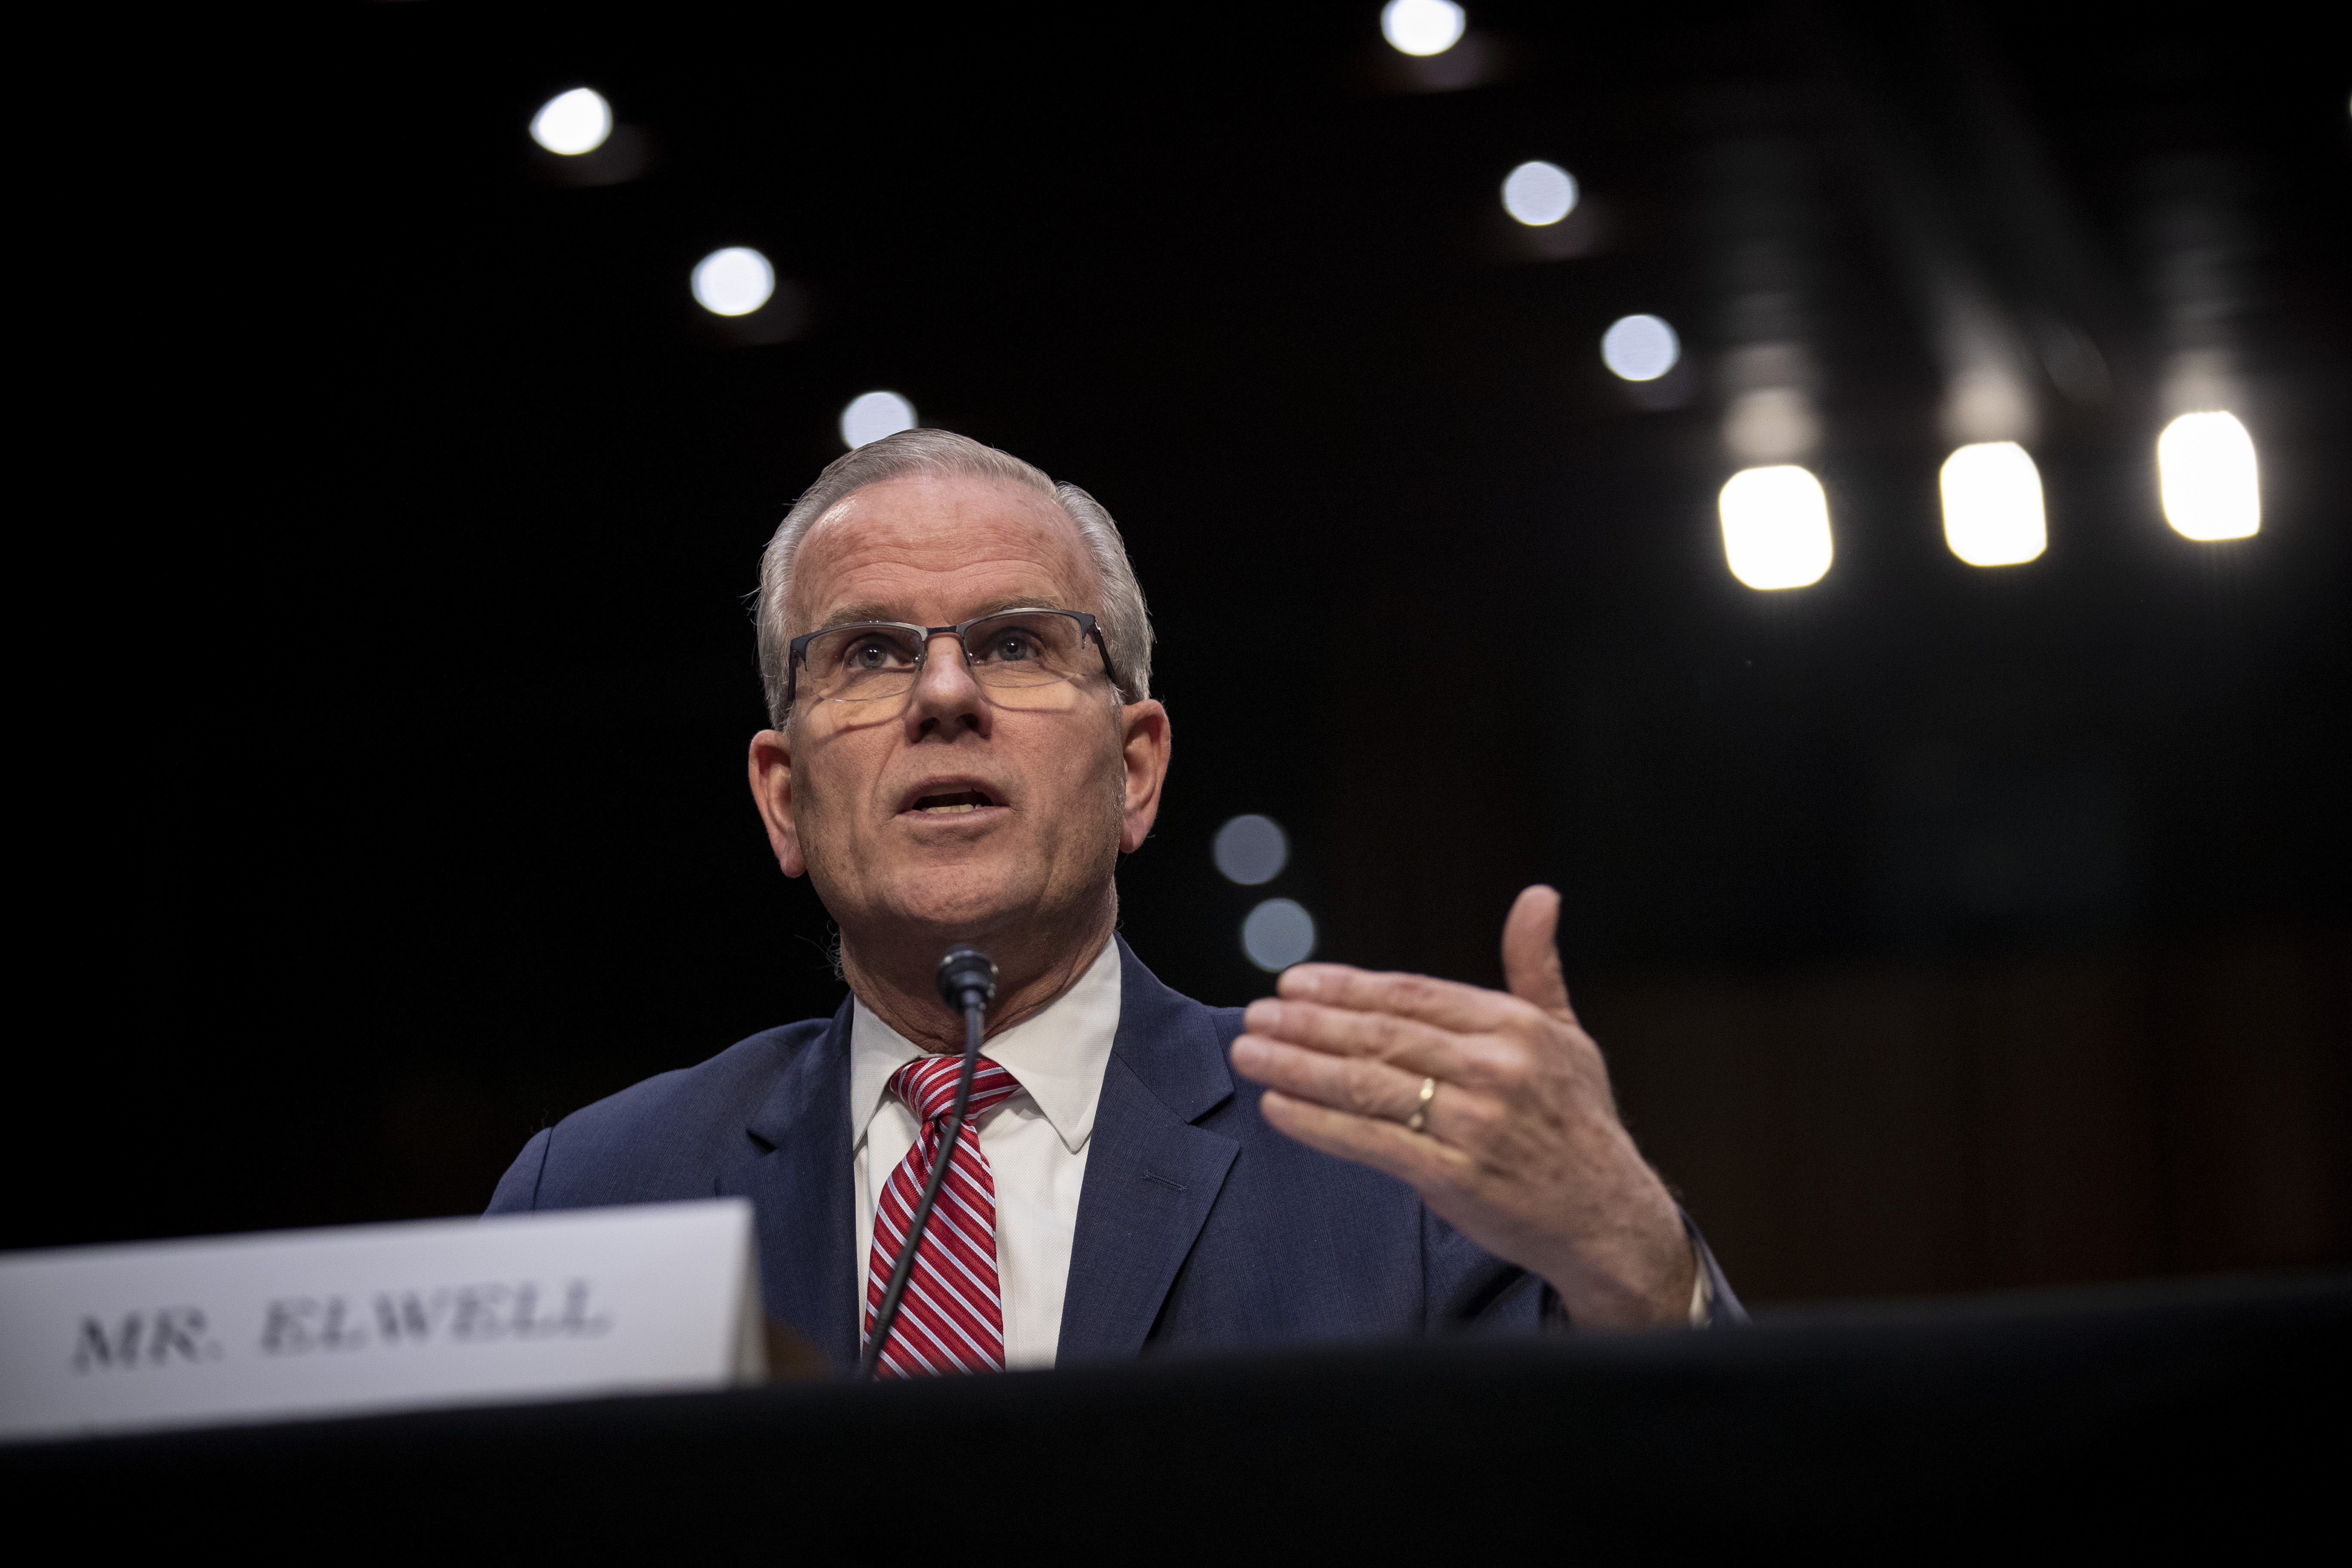 Acting administrator of the Federal Aviation Administration (FAA) Daniel Elwell testifies during a Senate Commerce Subcommittee on Aviation and Space hearing about the current state of airline safety in the Hart Senate Office Building, March 27, 2019 in Washington, DC. (Photo by Drew Angerer/Getty Images)